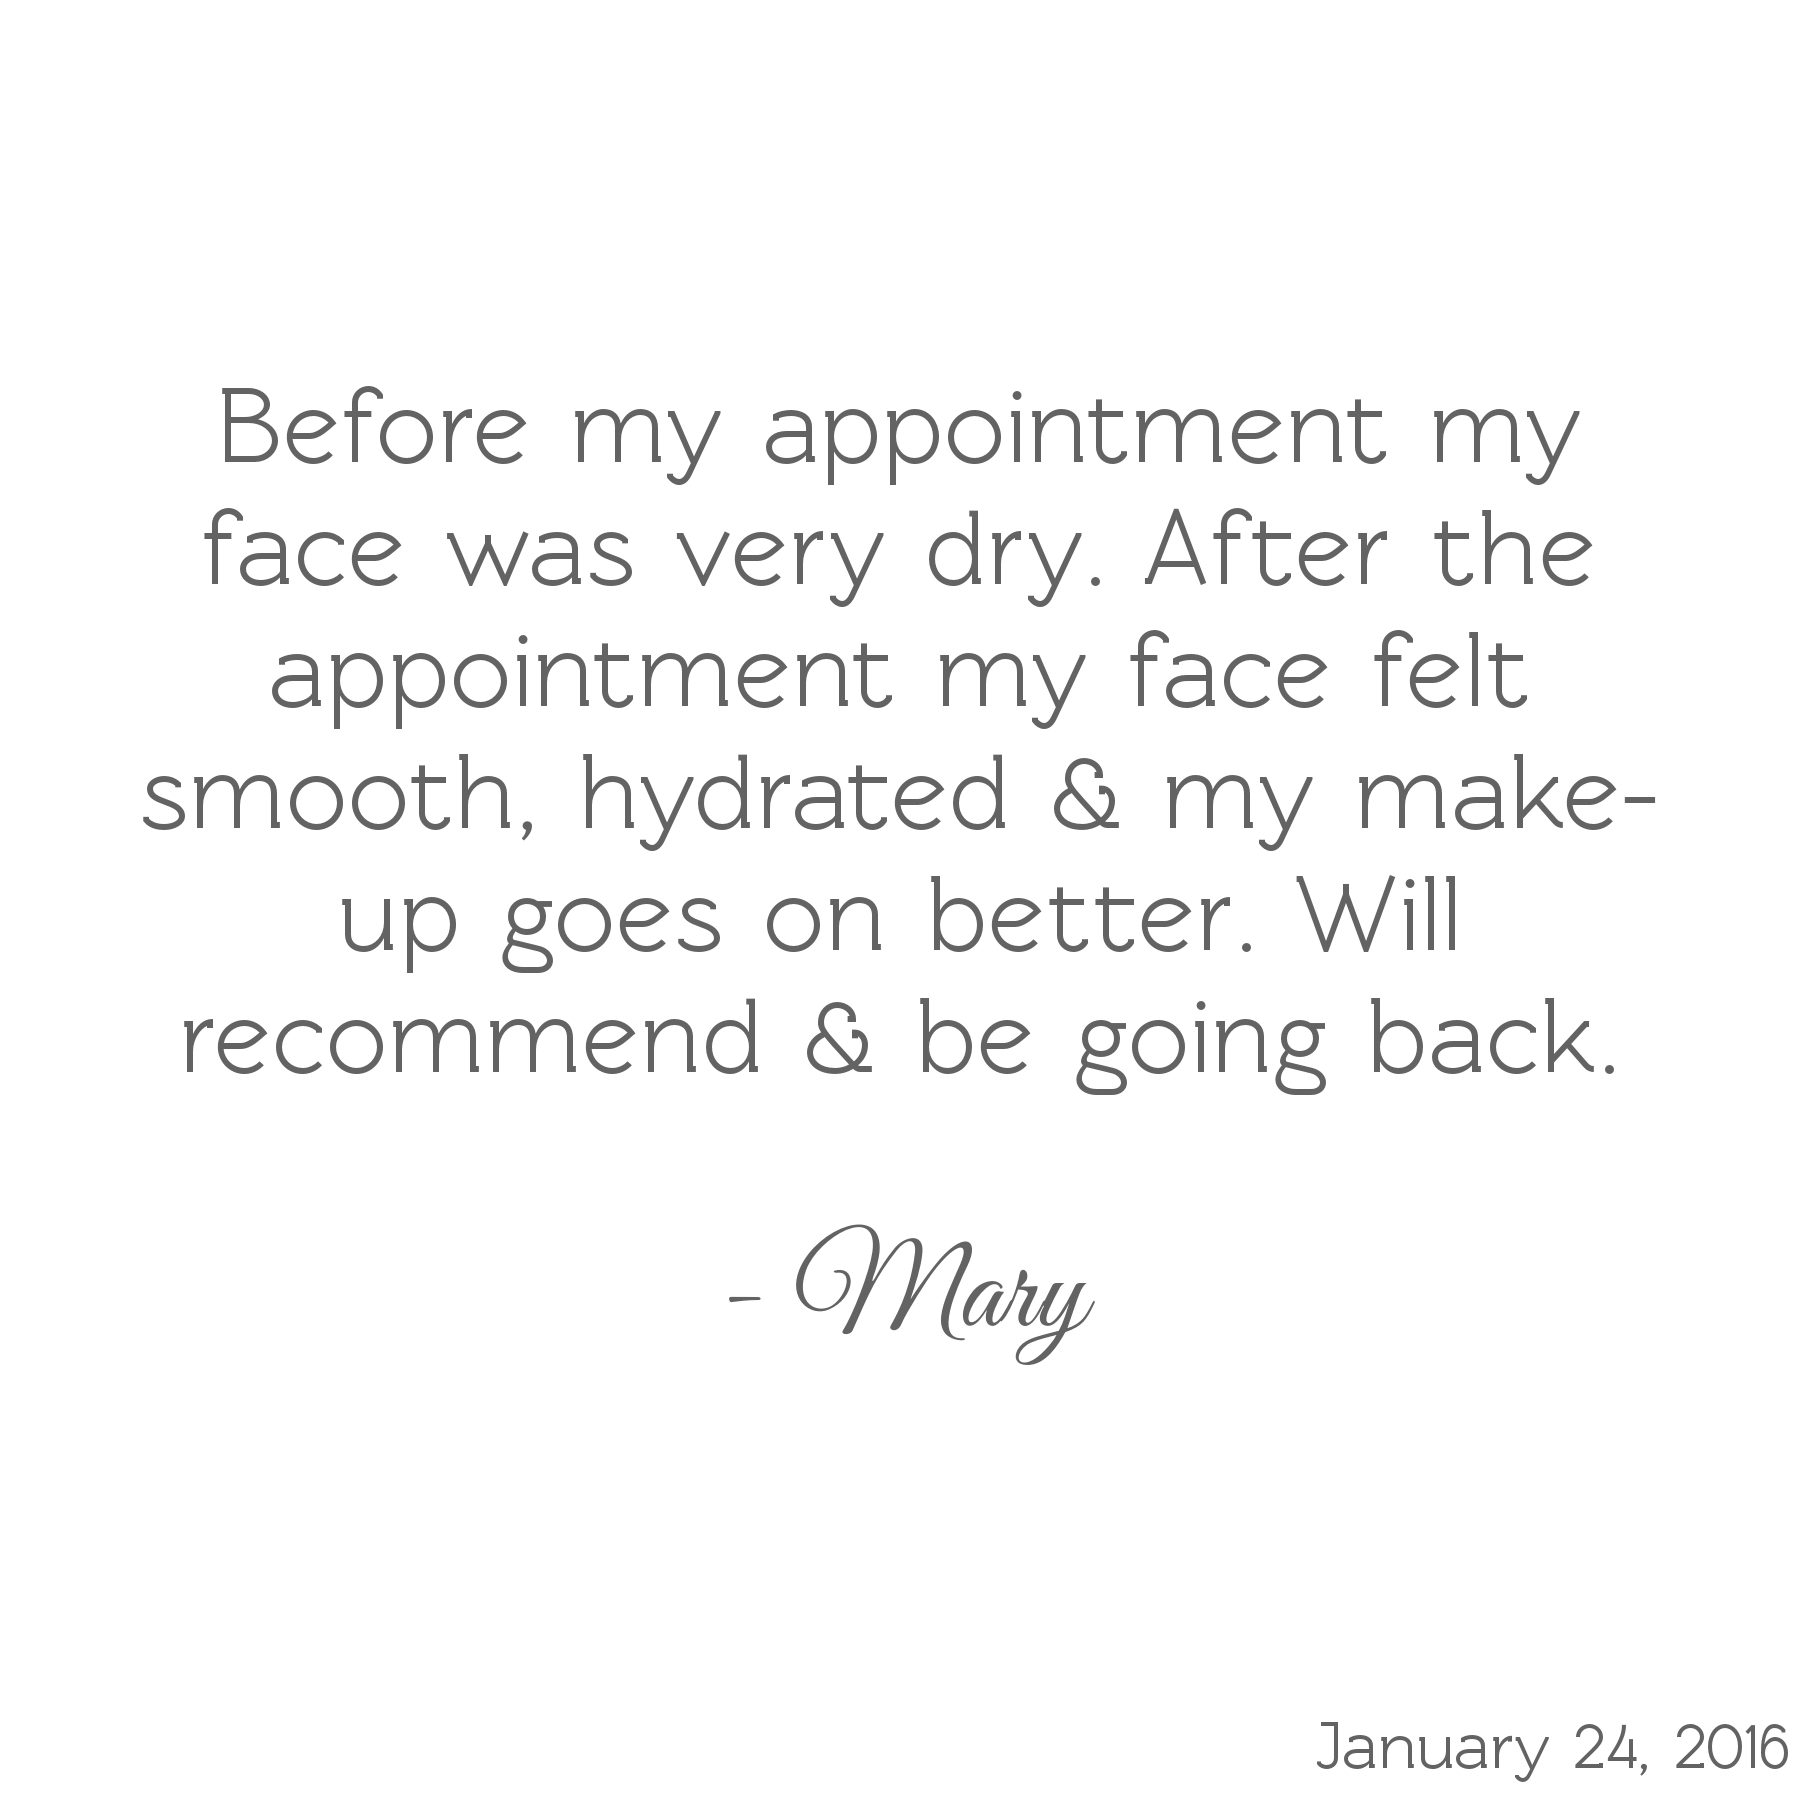 Before my appointment my face was very dry. After my appointment my face felt smooth, hydrated, & my make-up goes on better. Will recommend & be going back. -Mary